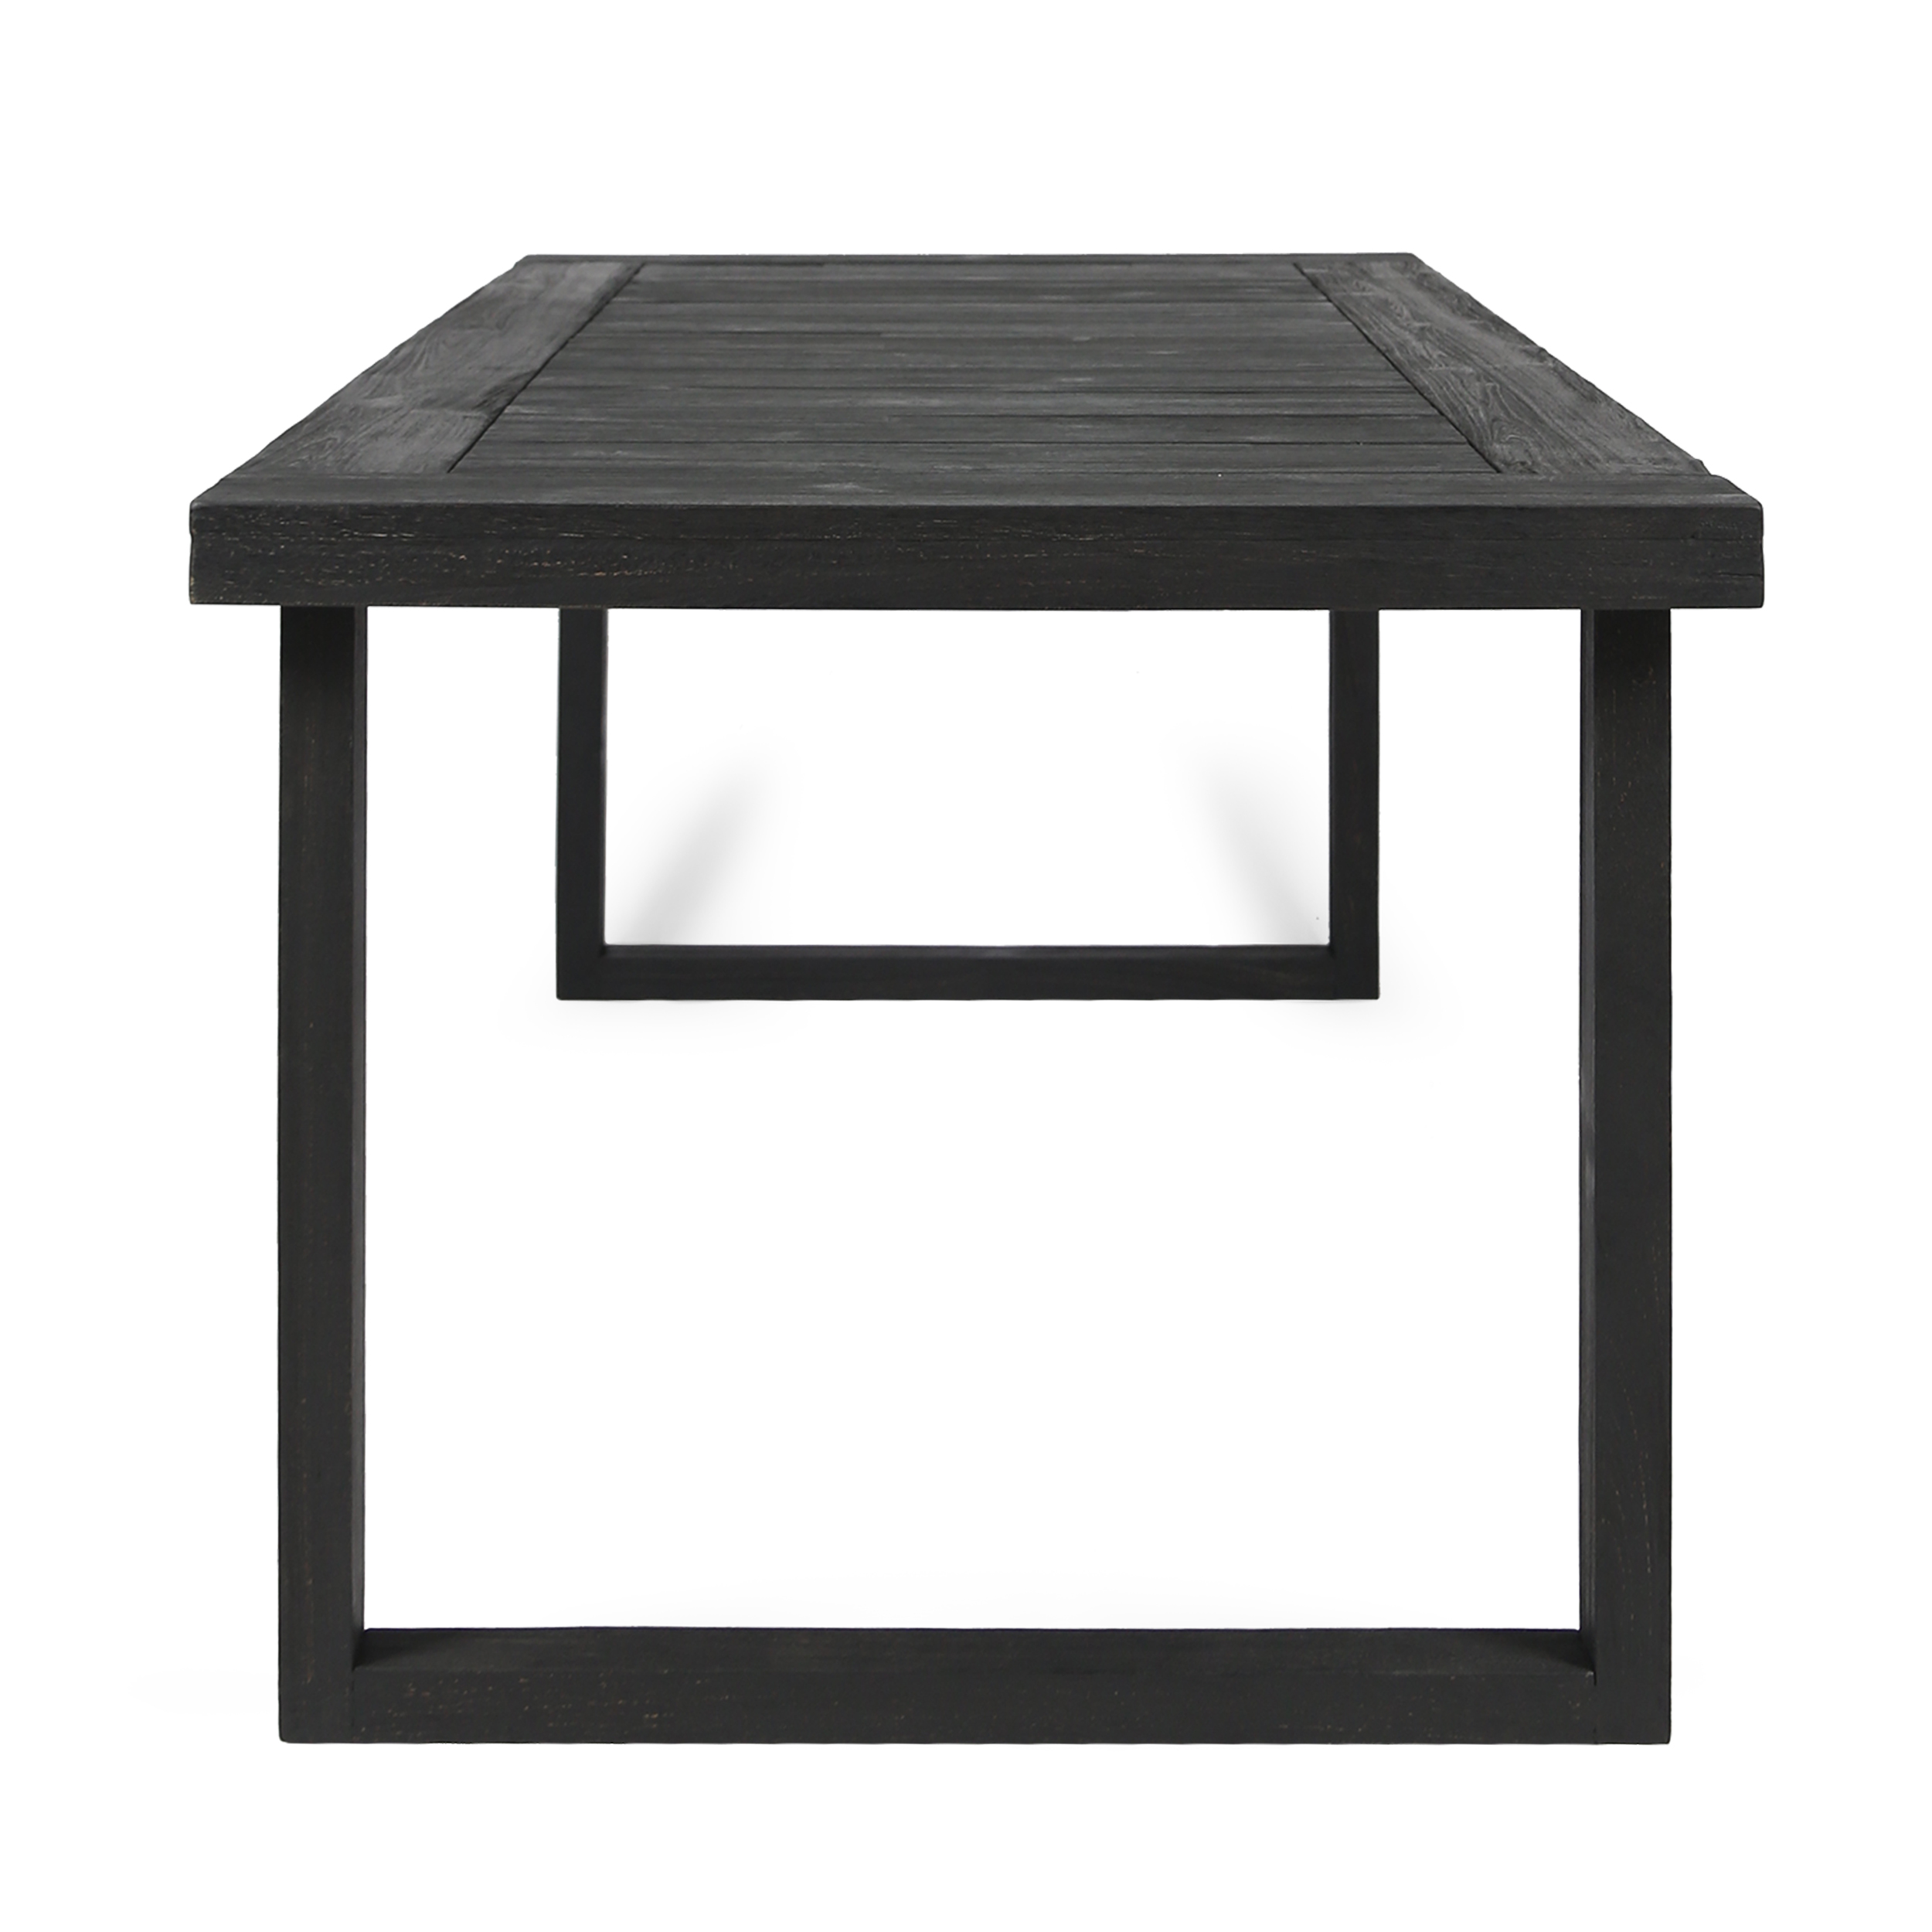 GDF Studio Agnew Outdoor Acacia Wood 6 Piece Dining Set with Bench, Sandblasted Dark Gray and Light Gray - image 5 of 12